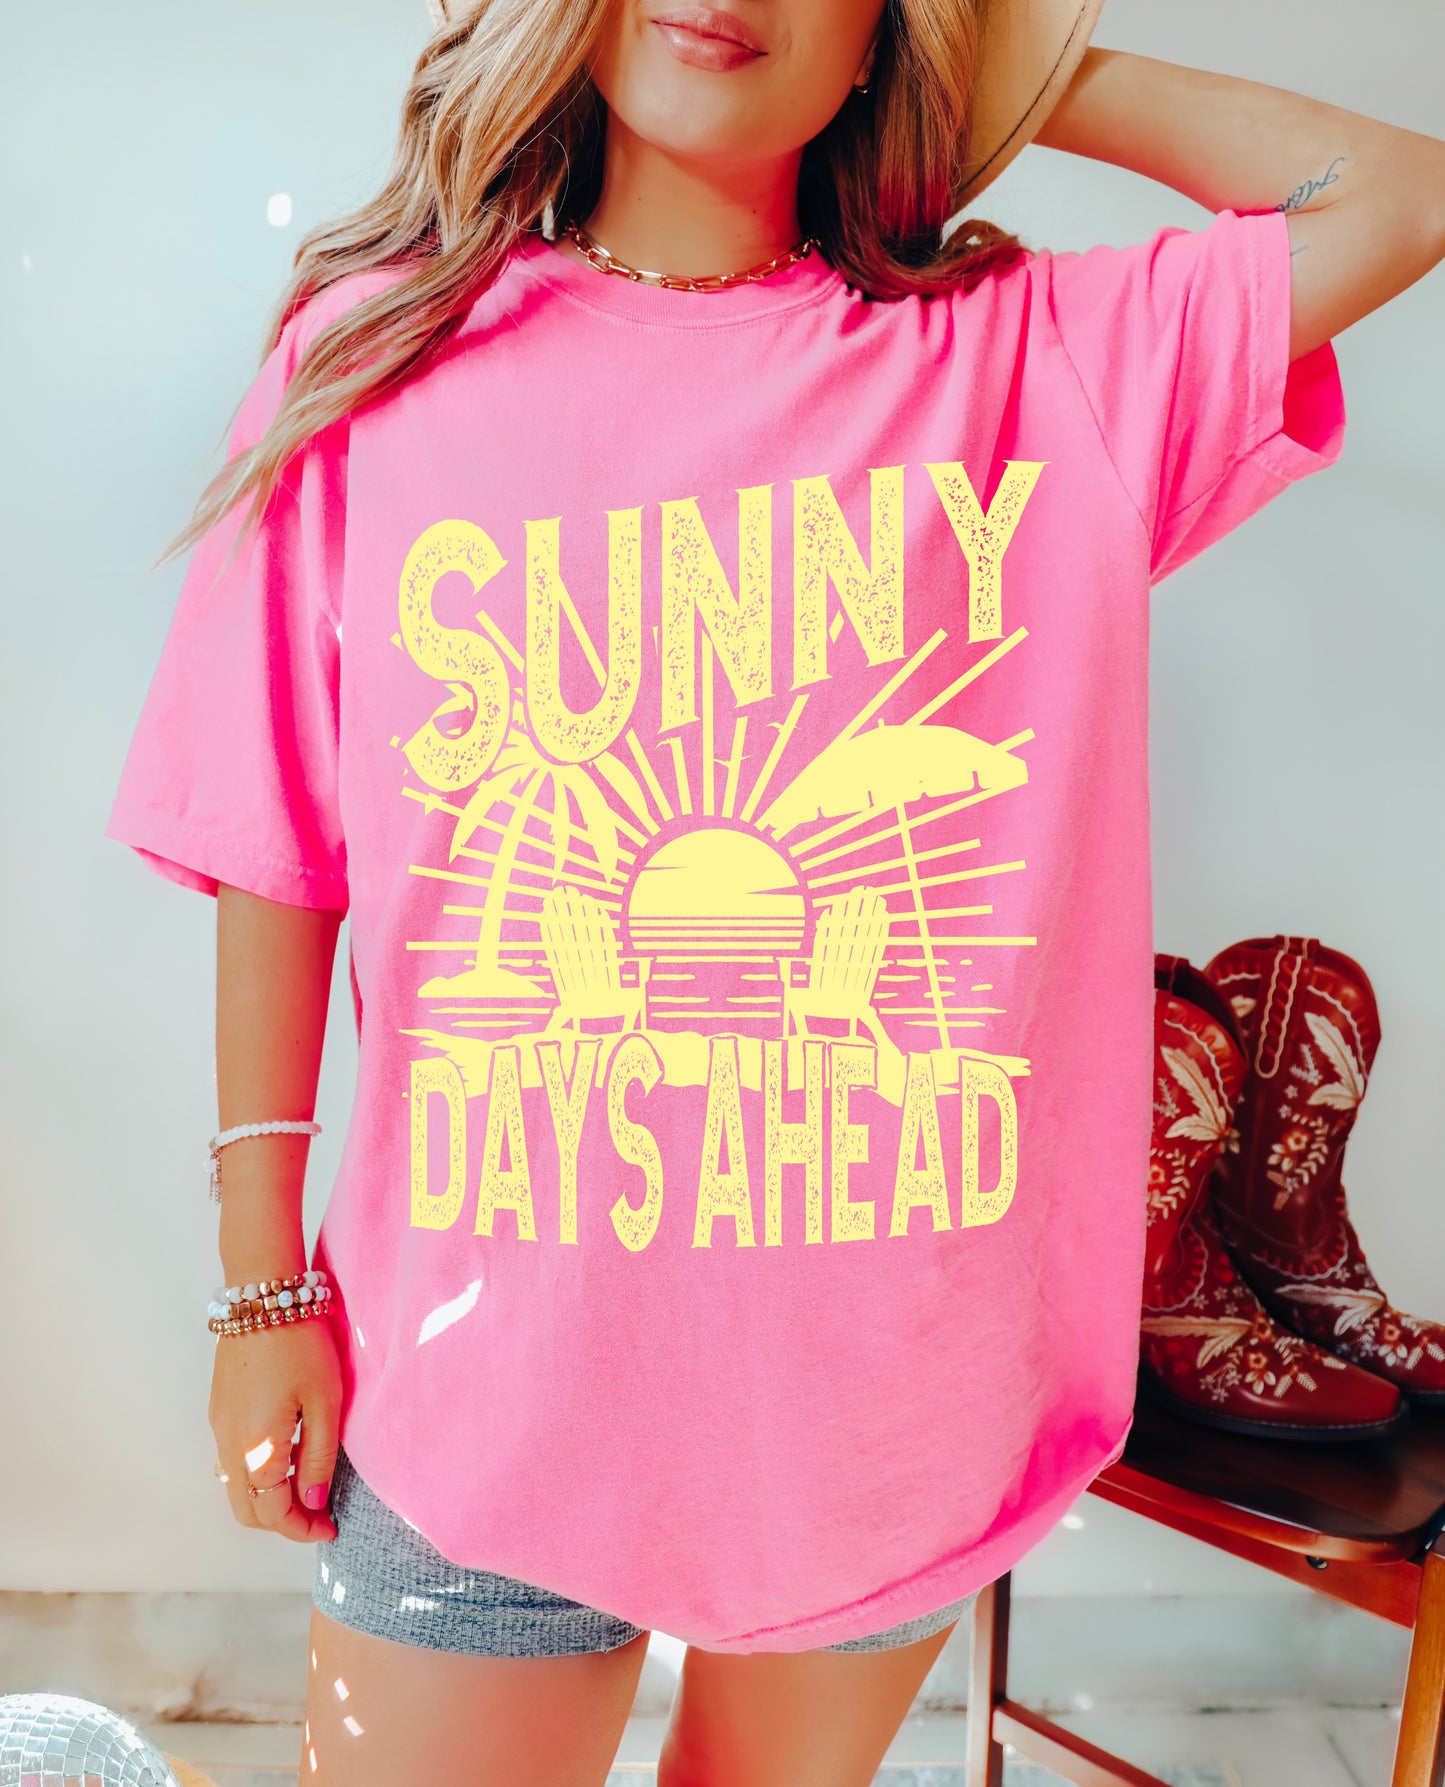 Comfort Colors or Bella Canvas Sunny Days Ahead Tee/ Summer Vibes Beach Cover Up Vacation Summer Tee